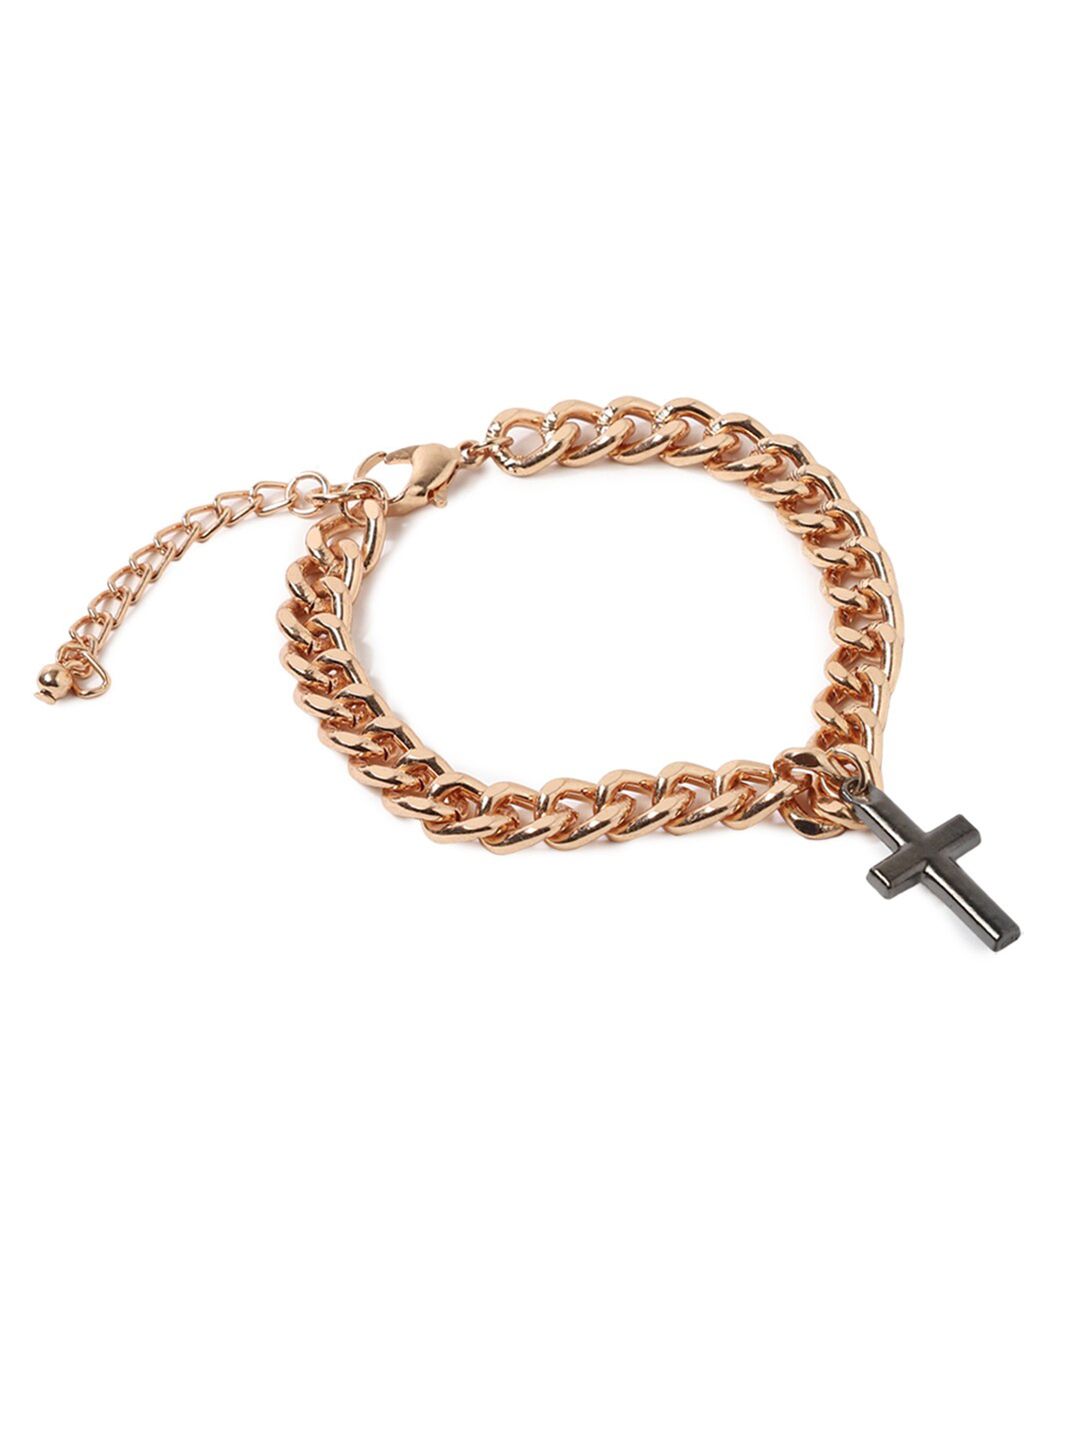 FOREVER 21 Women Gold & Gunmetal-Toned Cable Chain Cross Bracelet Price in India